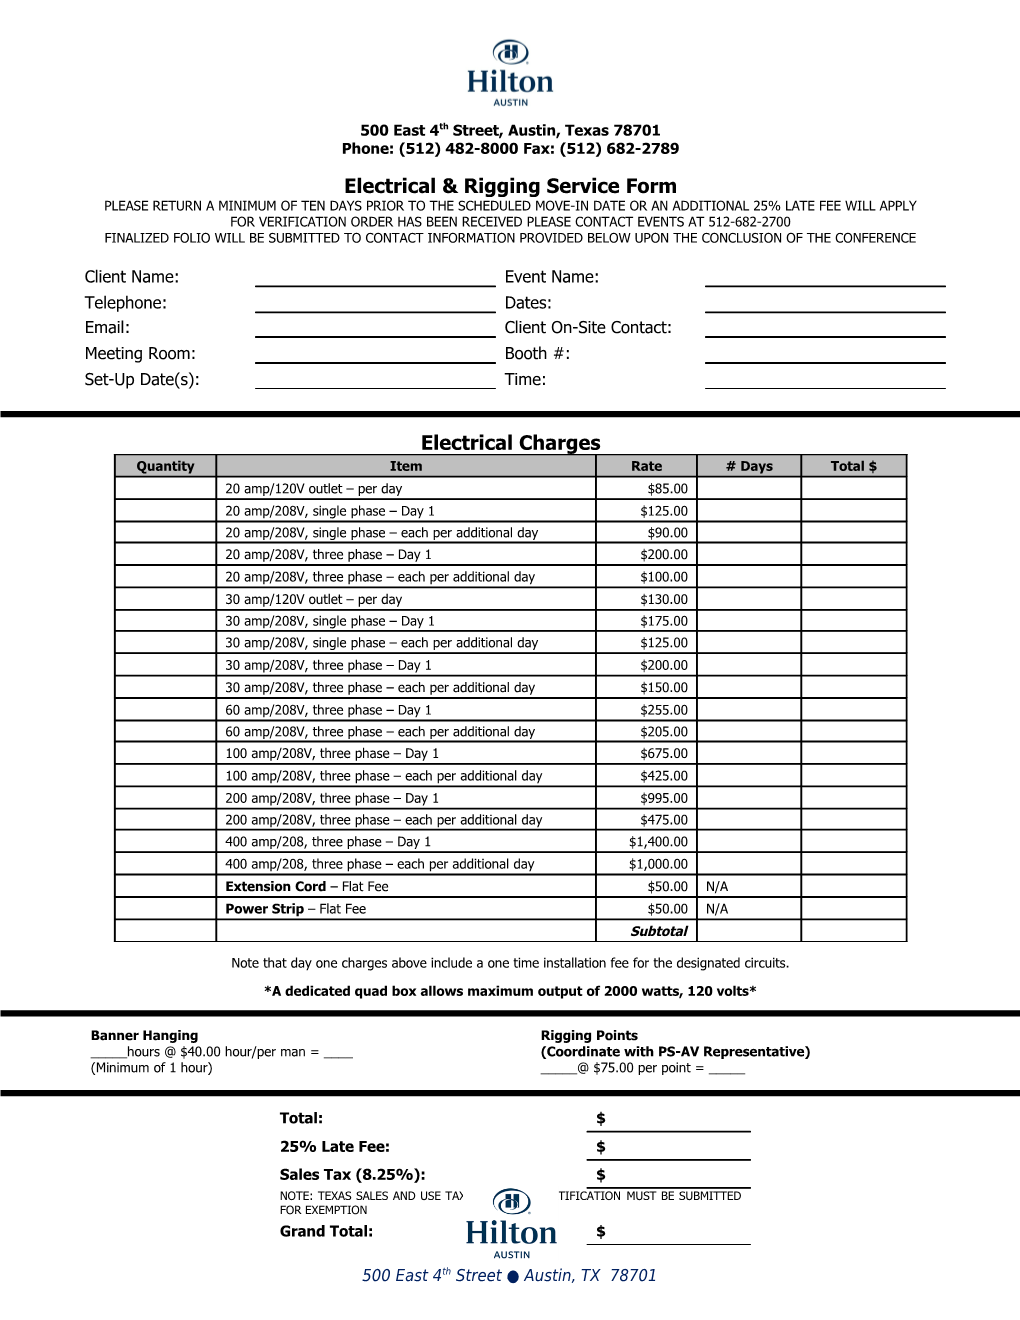 Electrical & Rigging Service Form